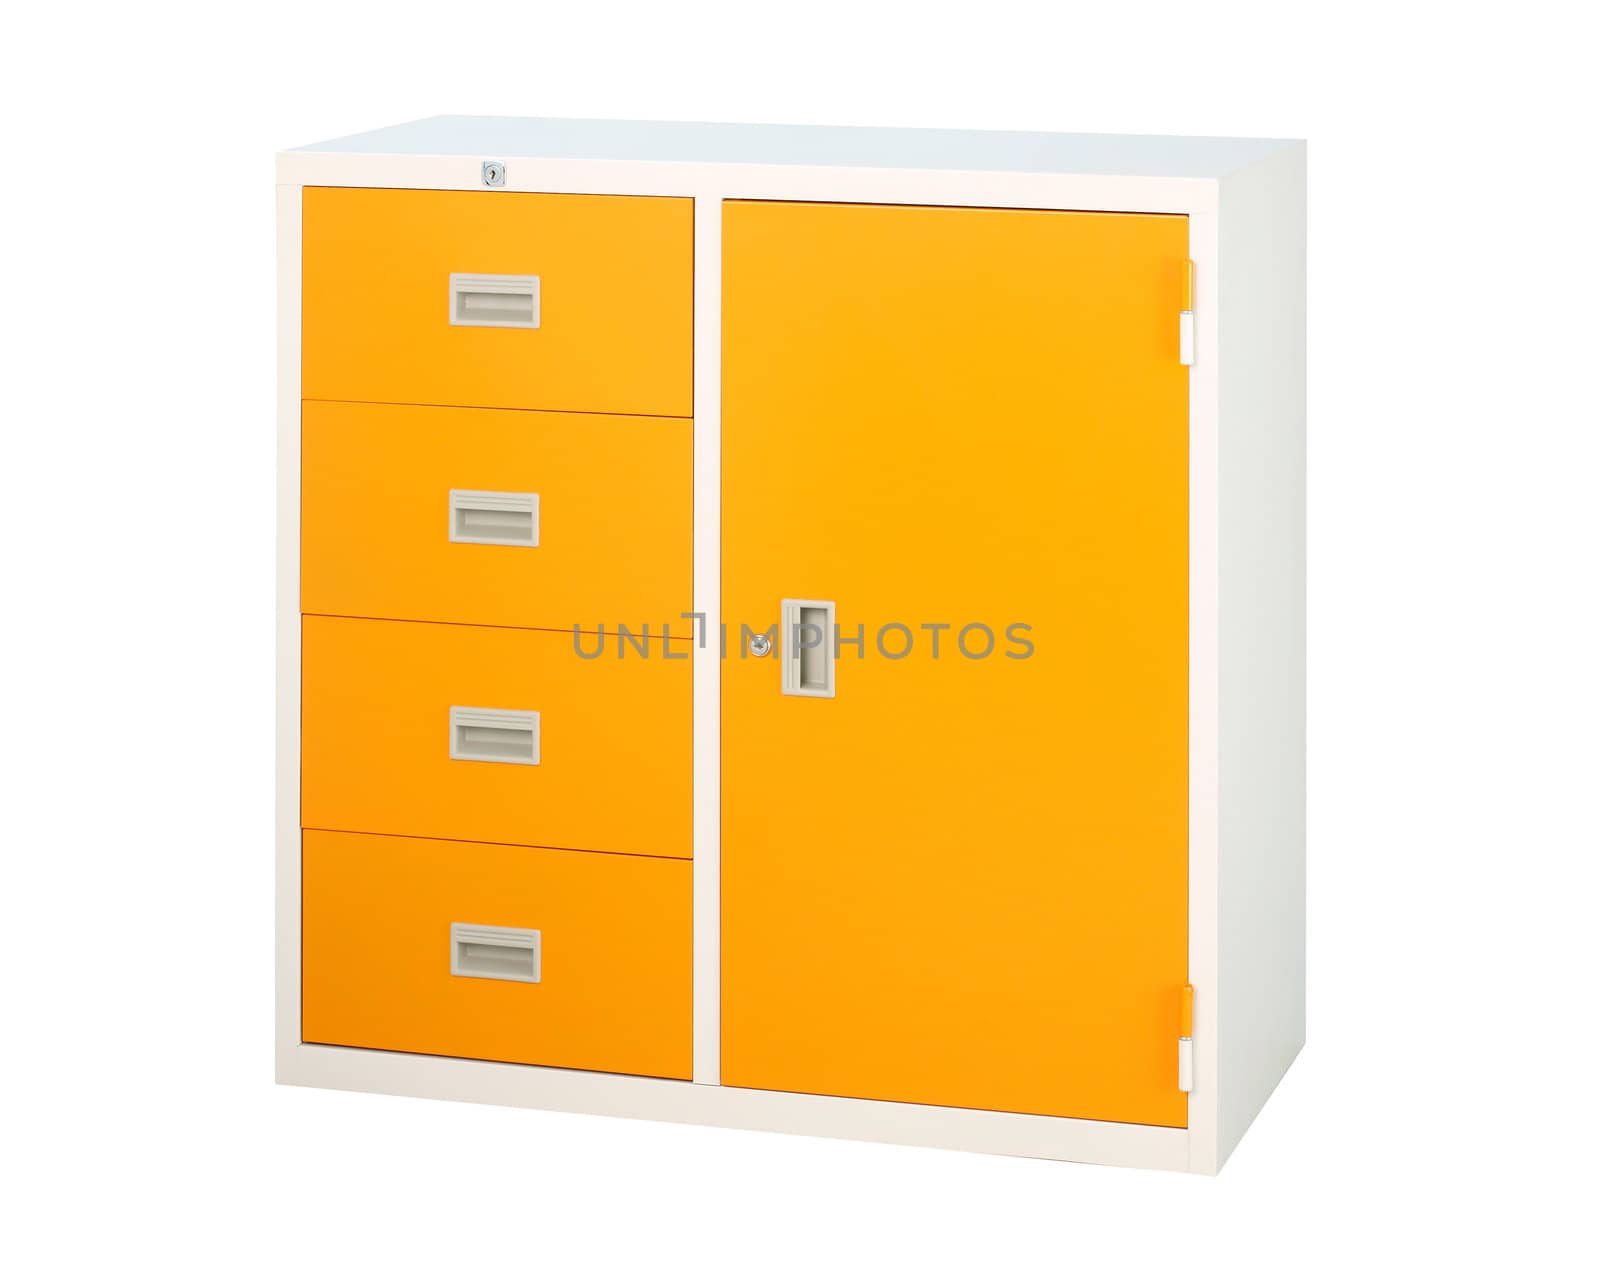 Cabinet in orange color with drawers and shelf